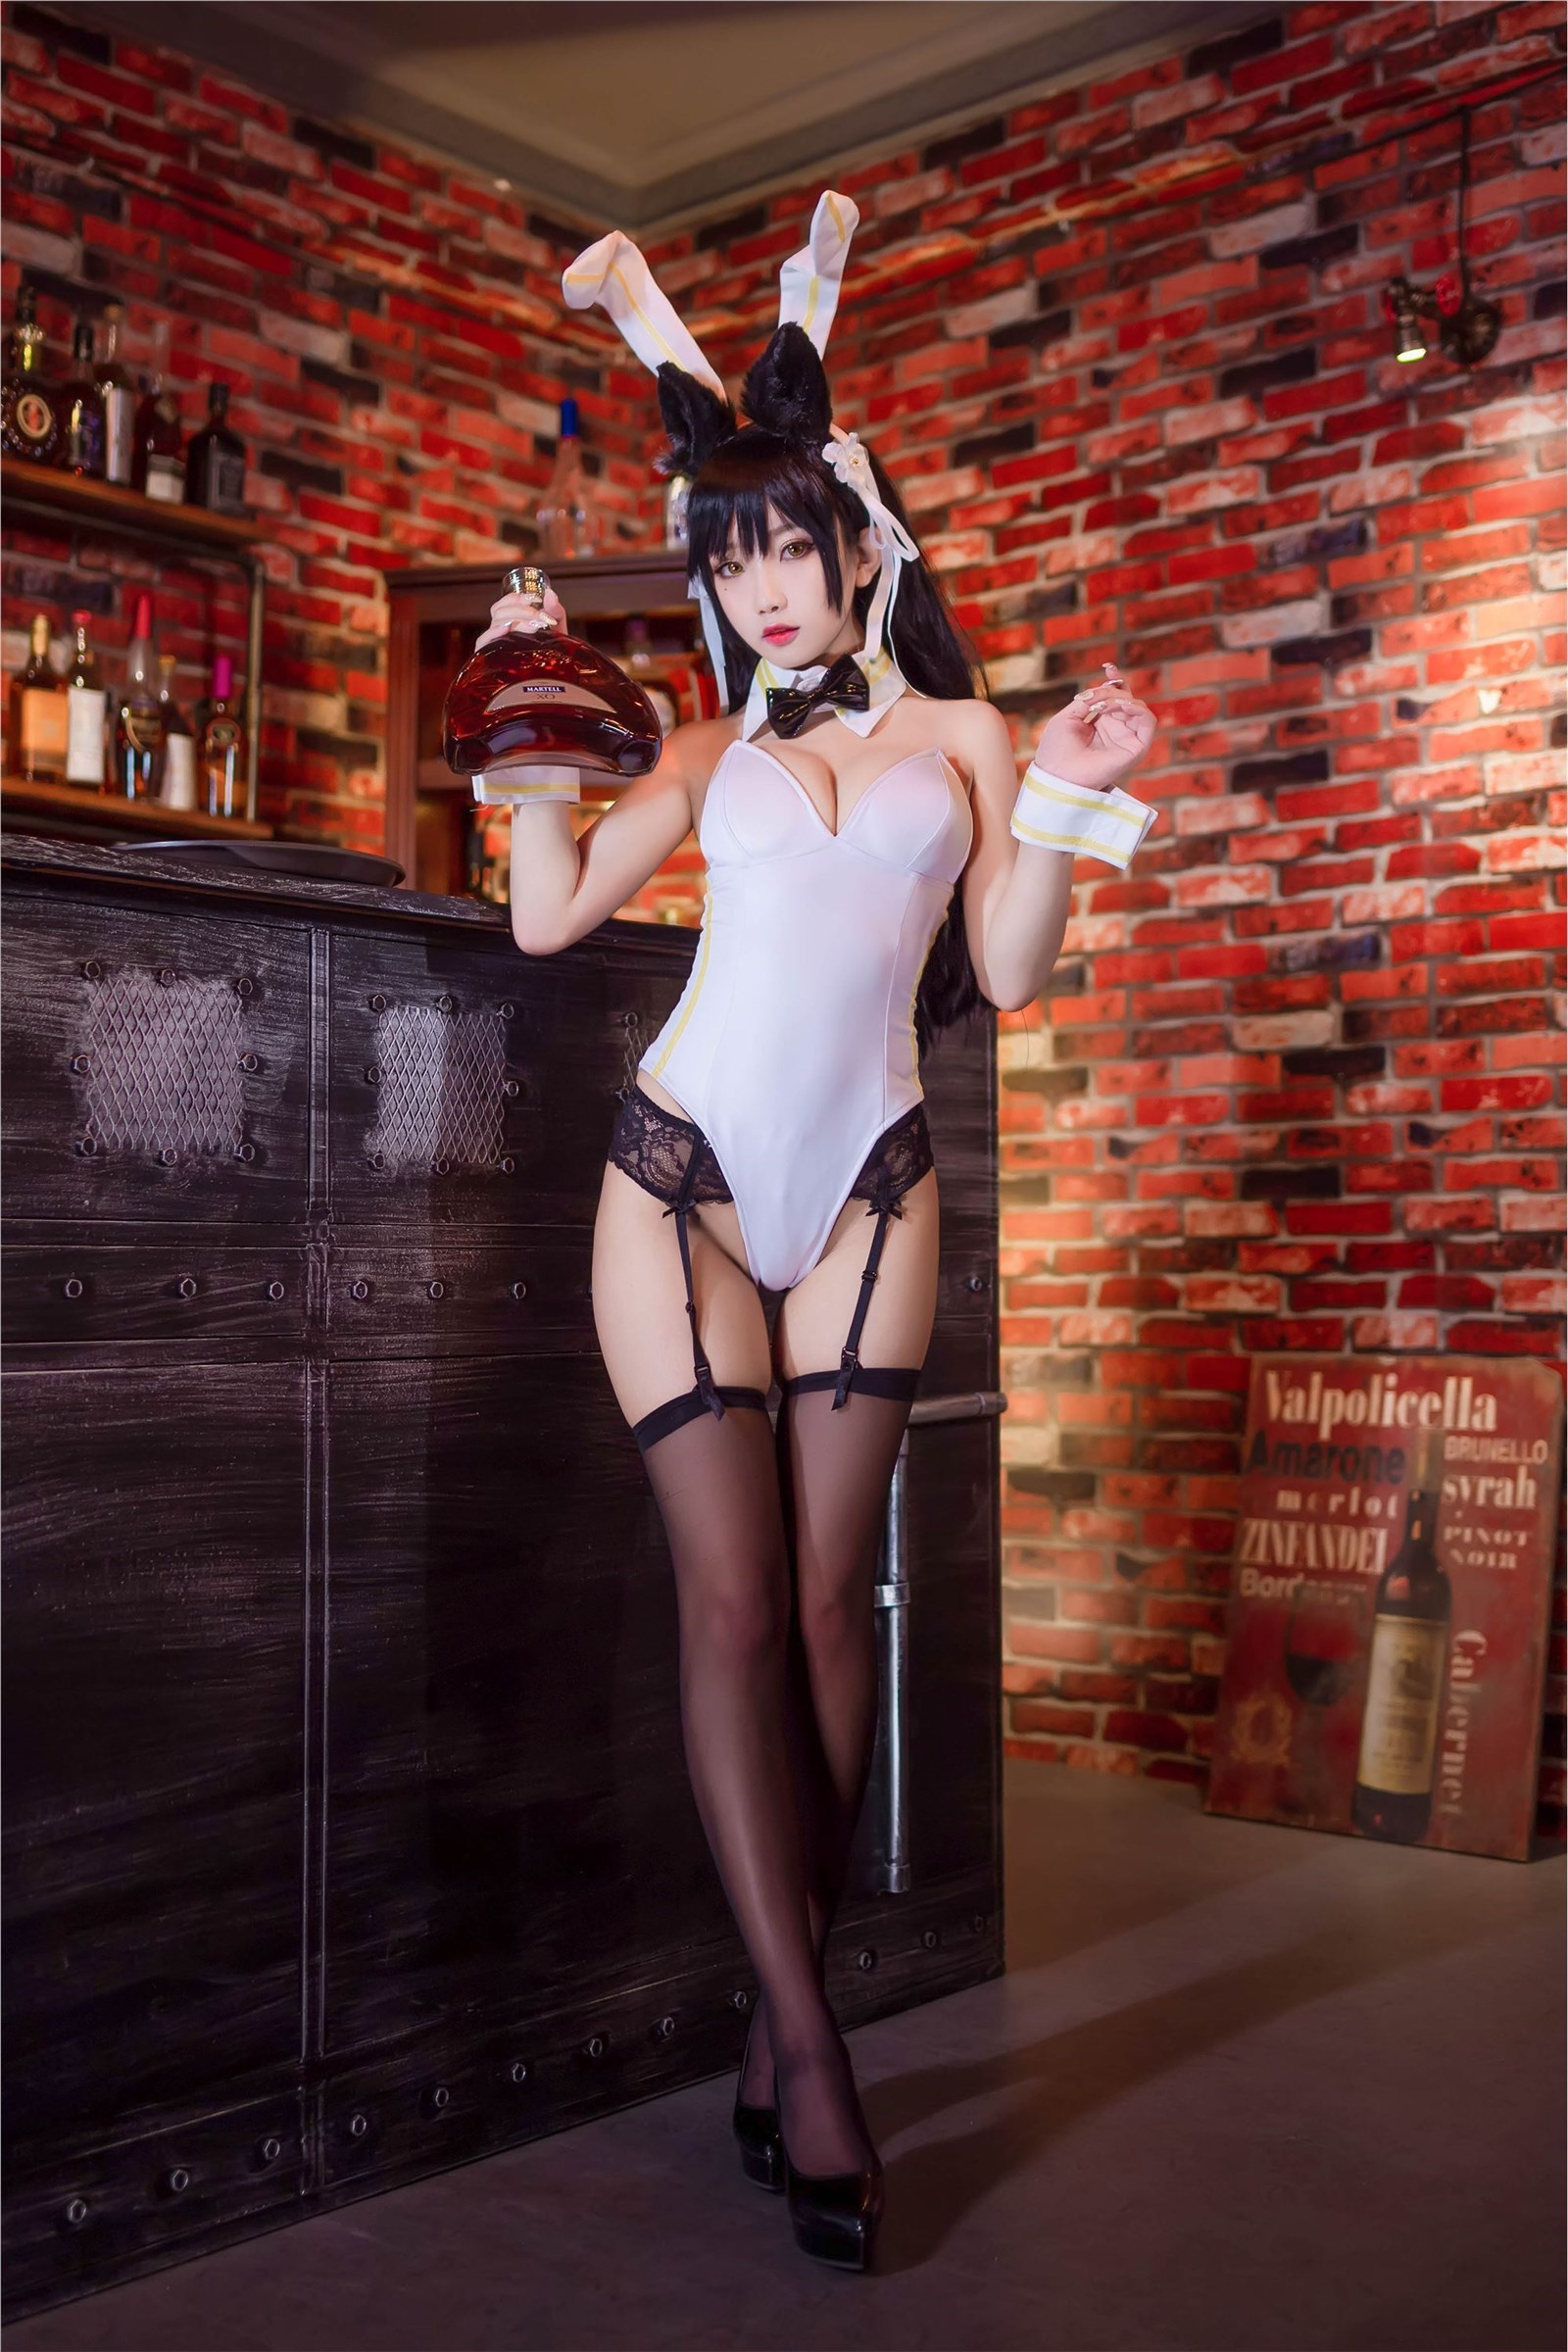 Cosplay is Yao in or not - bar Bunny(8)